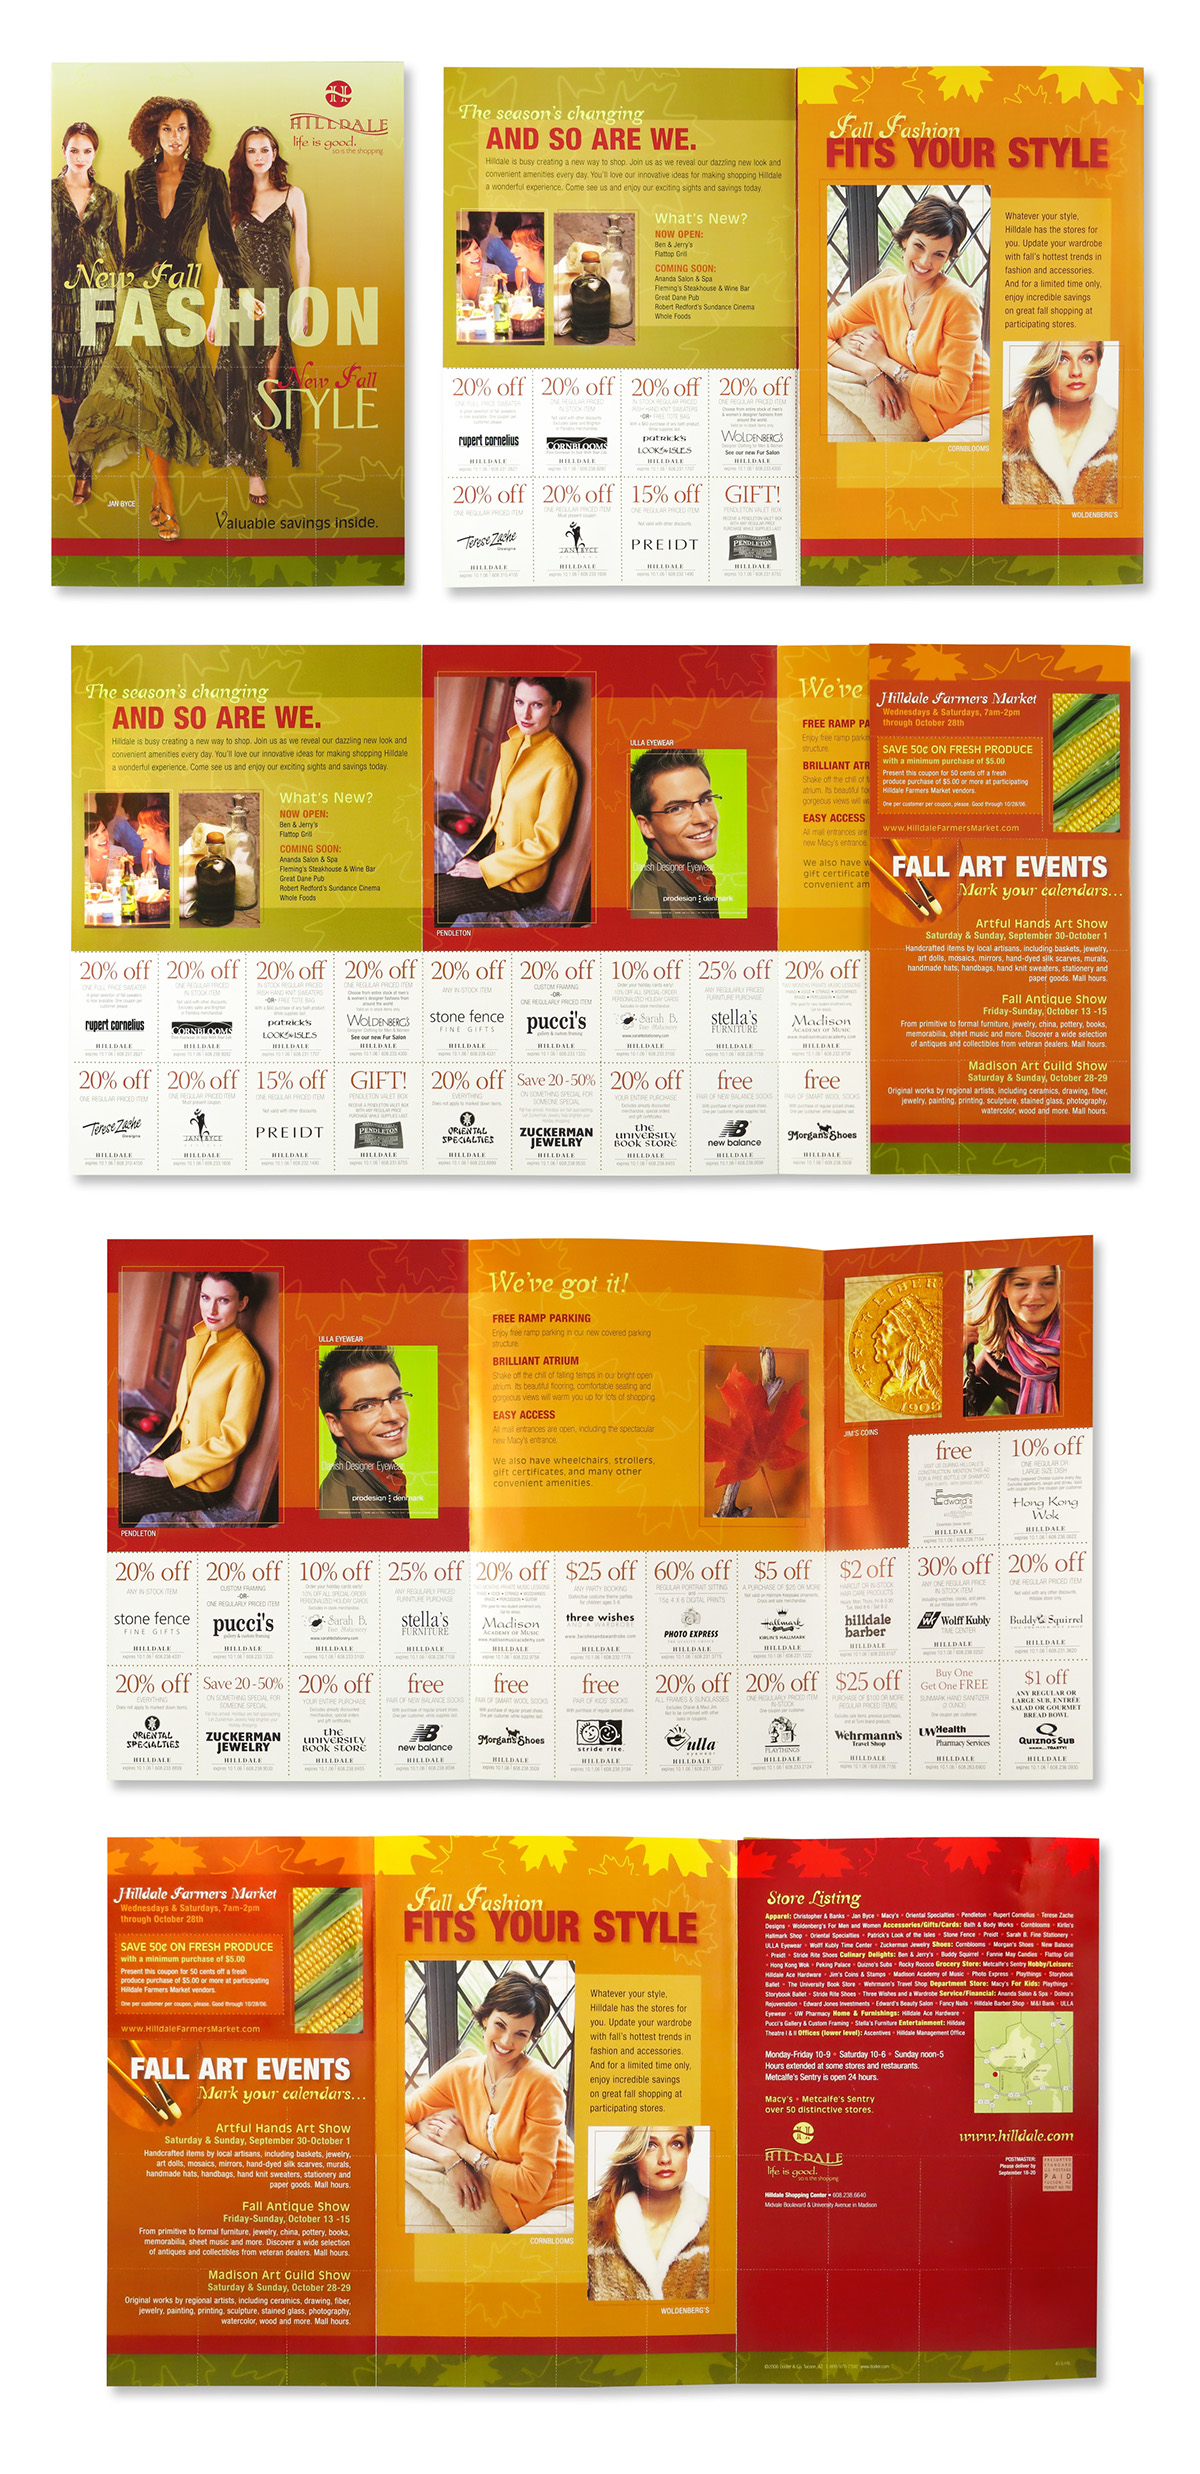 directmail Coupons Fall fallfashion green orange red fallcolors ads Promotion campaign